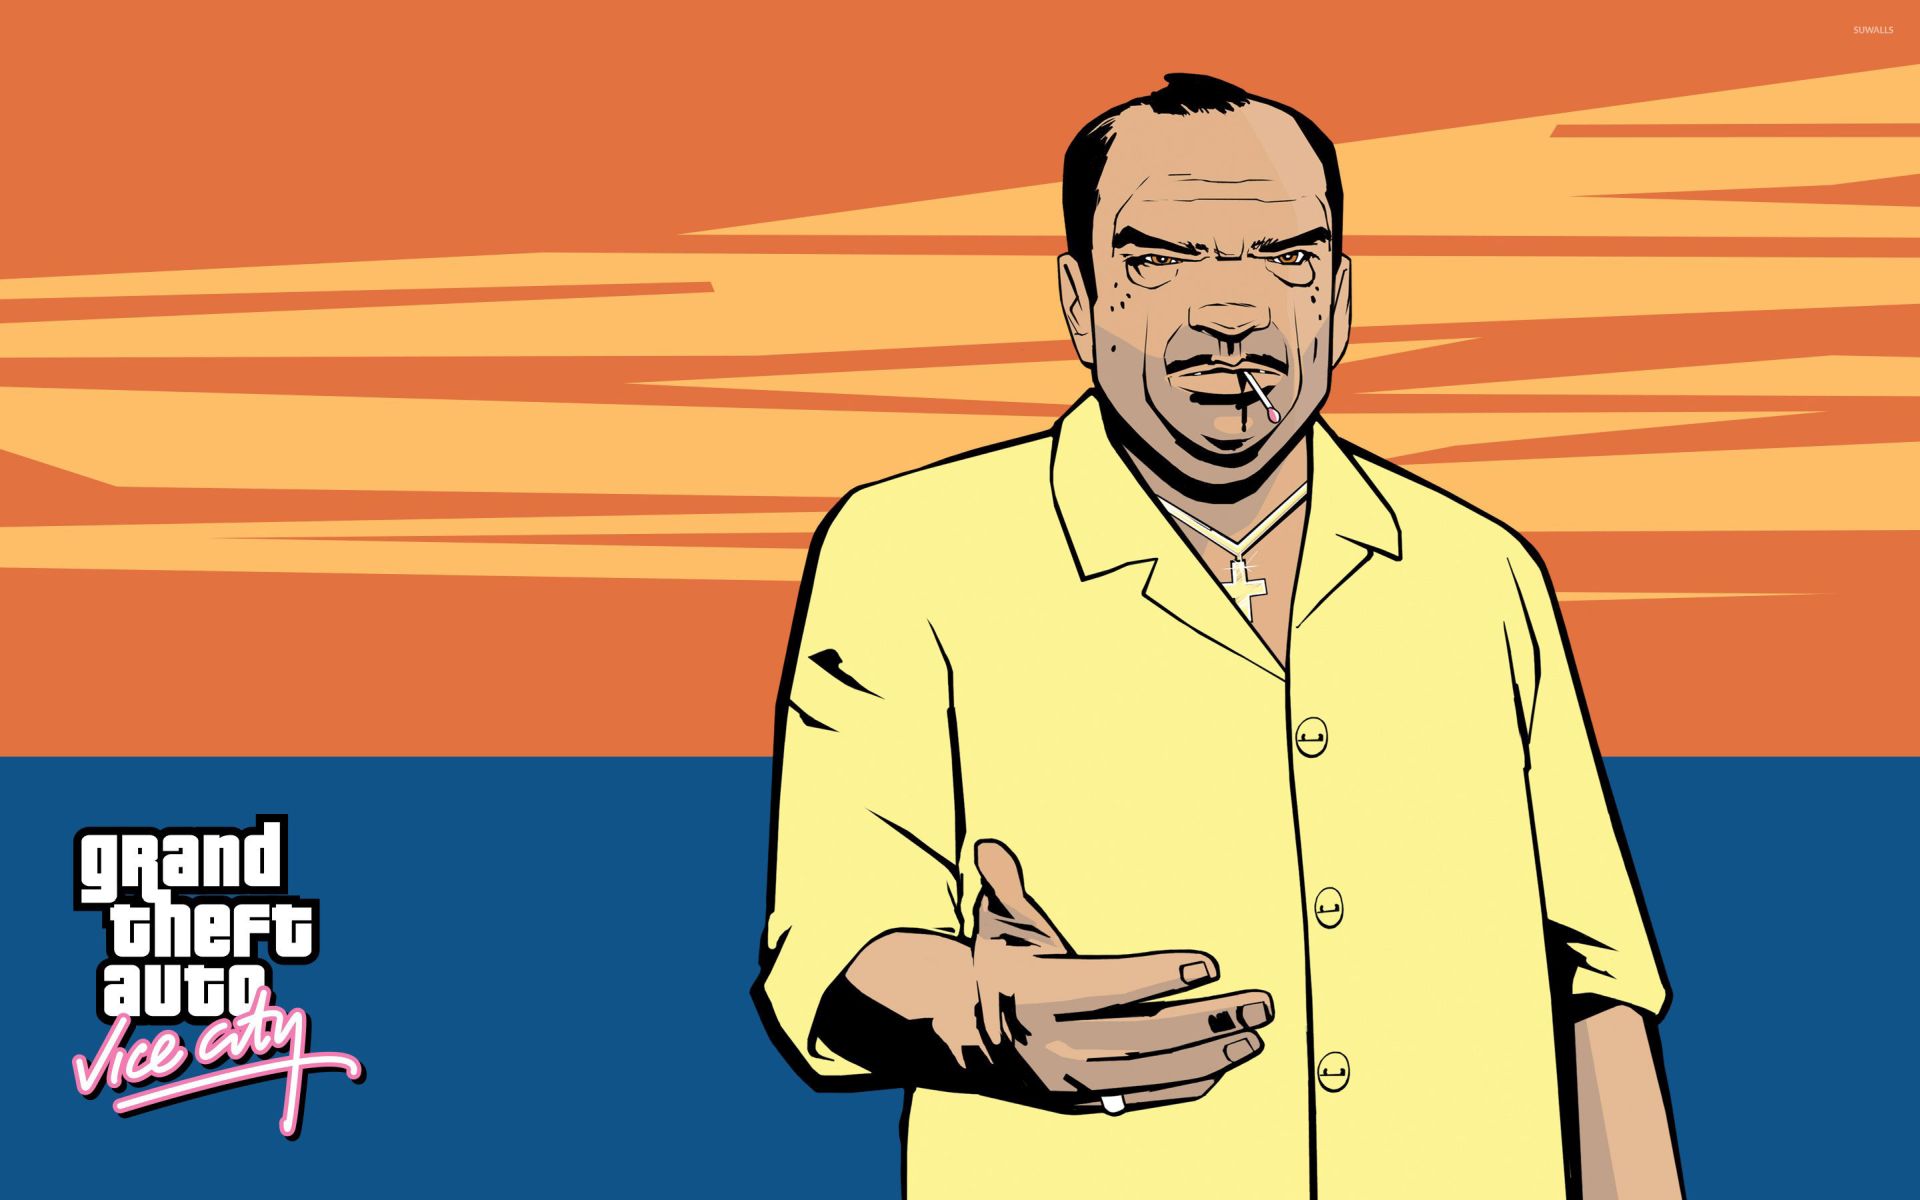 GTA 3' and 'Vice City' fan project has received a DMCA takedown